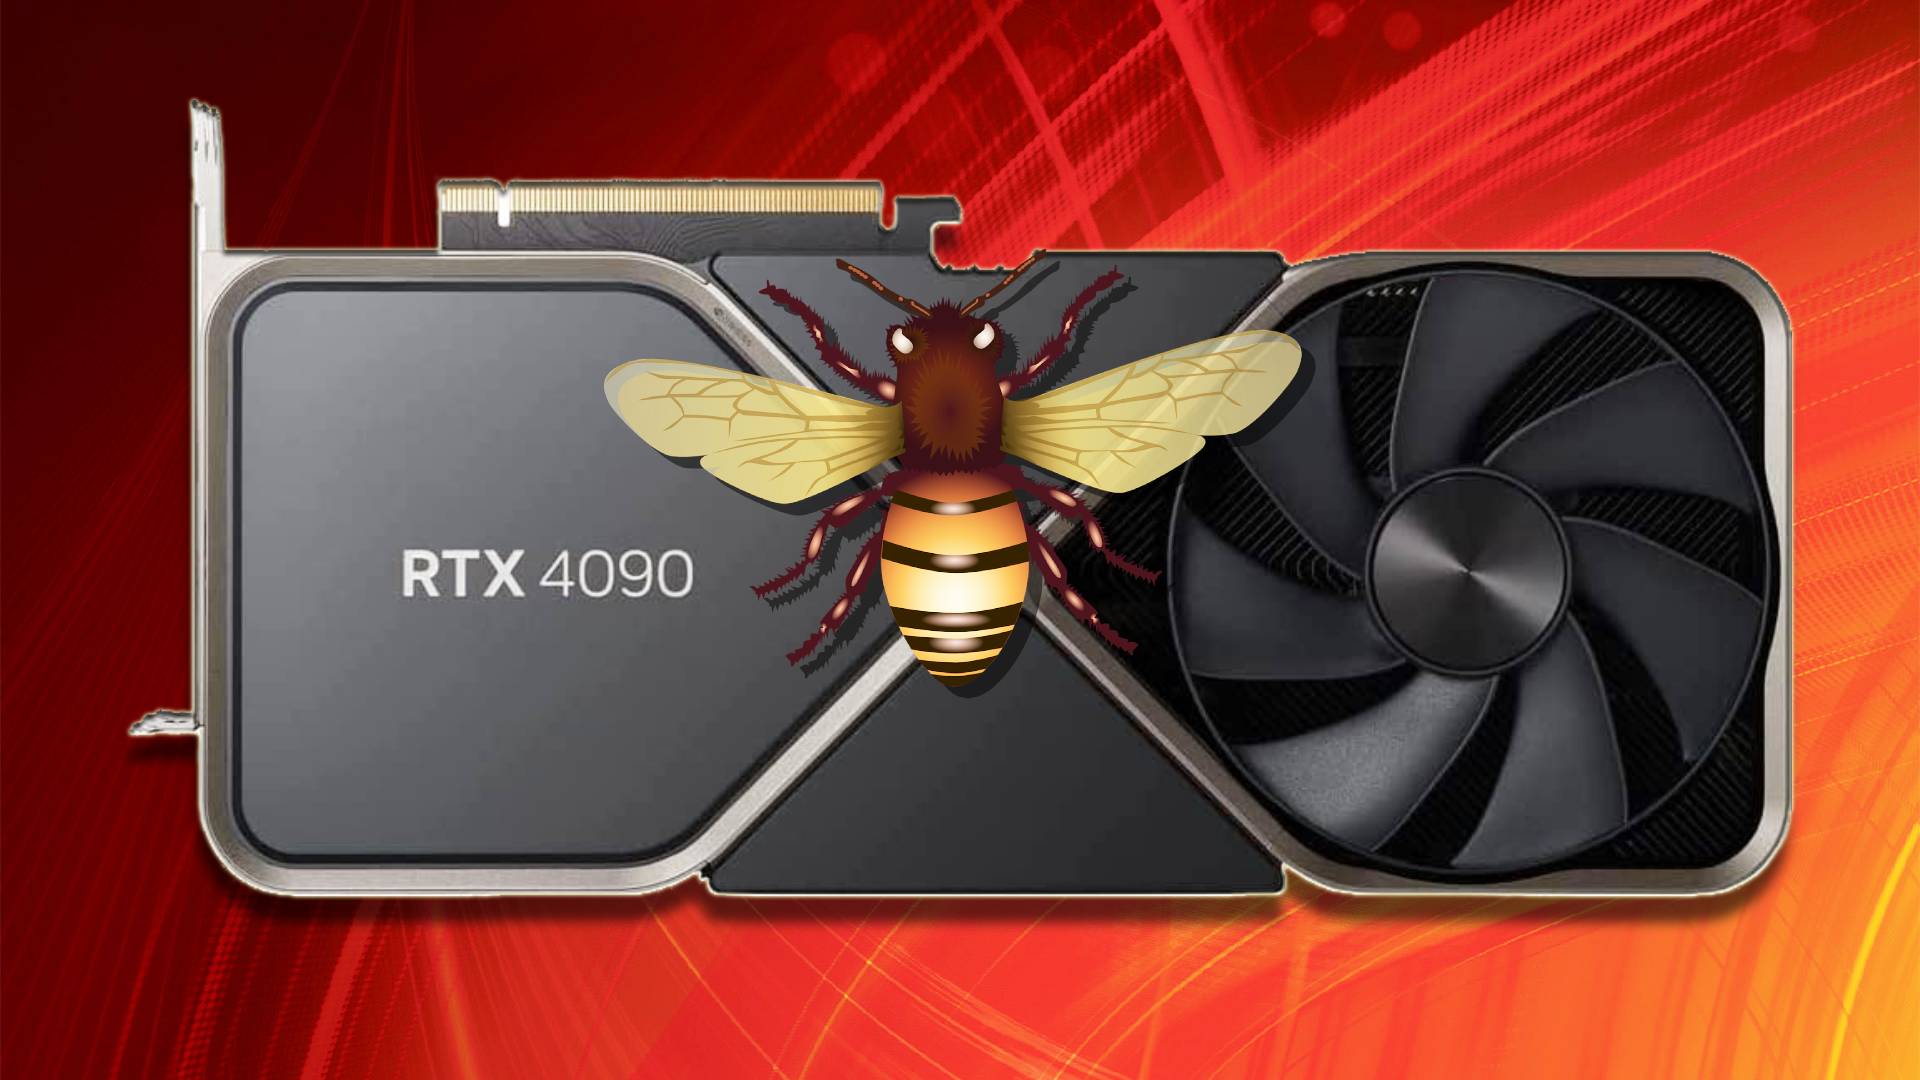 This Nvidia GeForce RTX 4090 contains a bug, literally